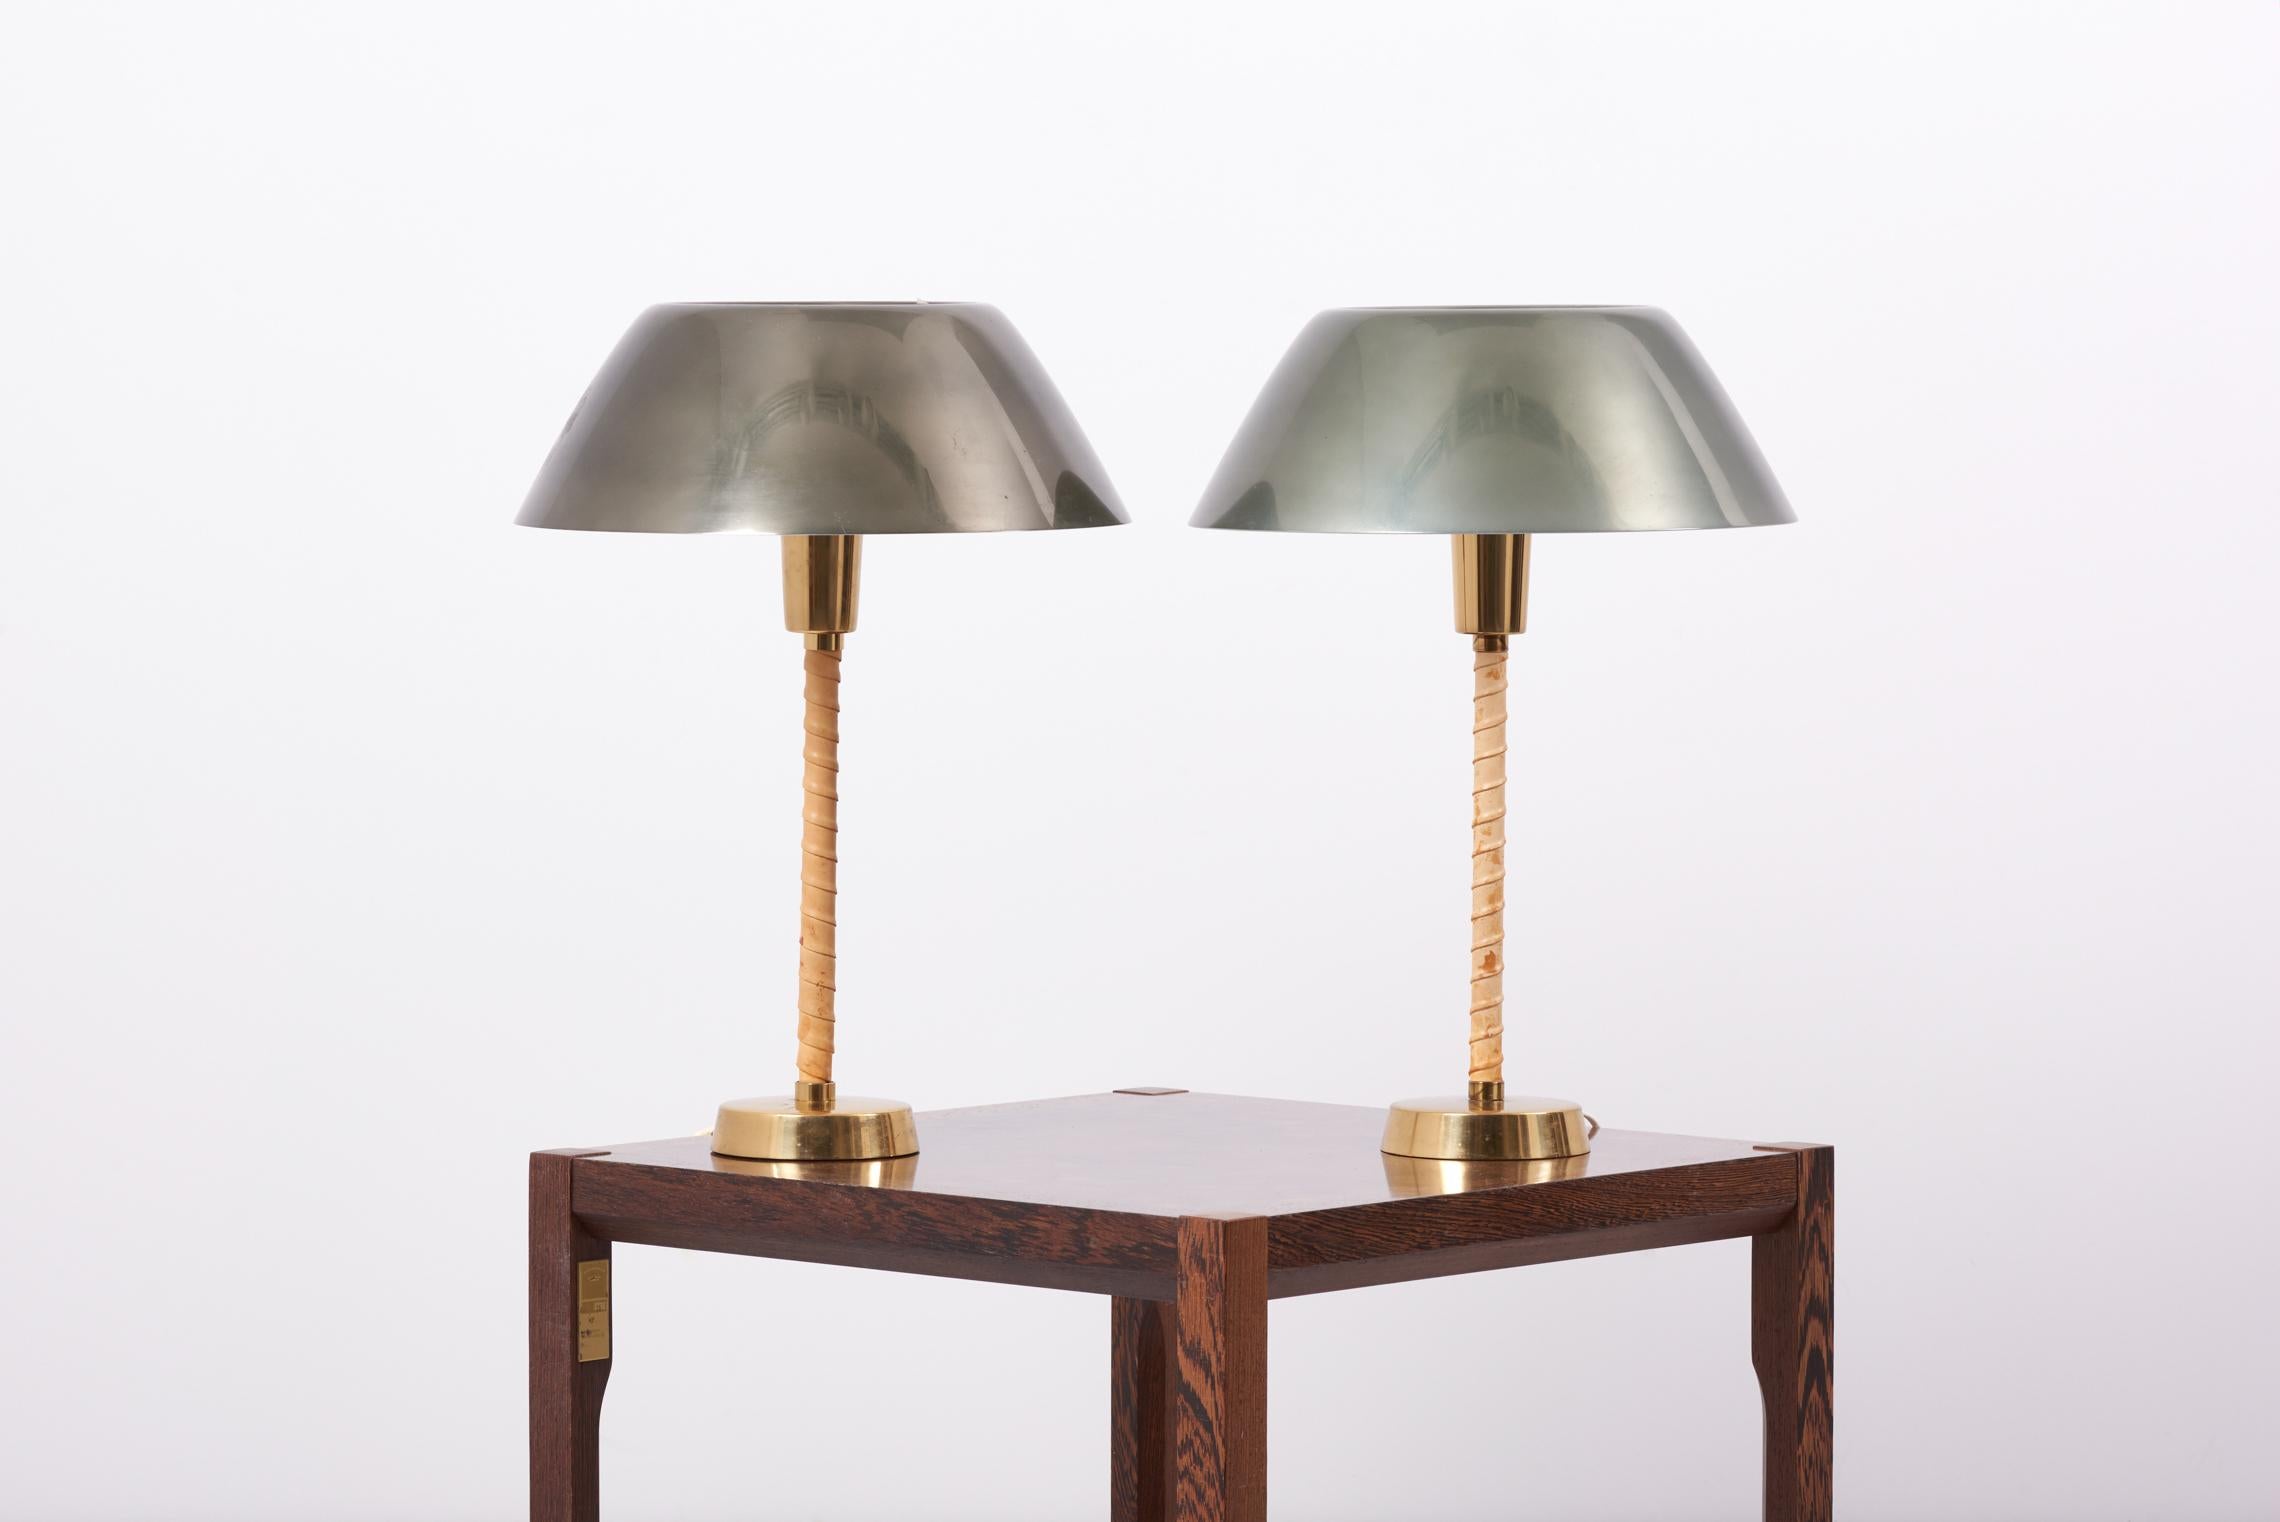 Pair of table lamps, called Senator or model 940025, designed by Lisa Johansson-Pape and manufactured by Orno in Finland, circa 1960. Made of enamel, aluminum, brass and leather.

1 x E27 socket / each.

Please note: Lamp should be fitted